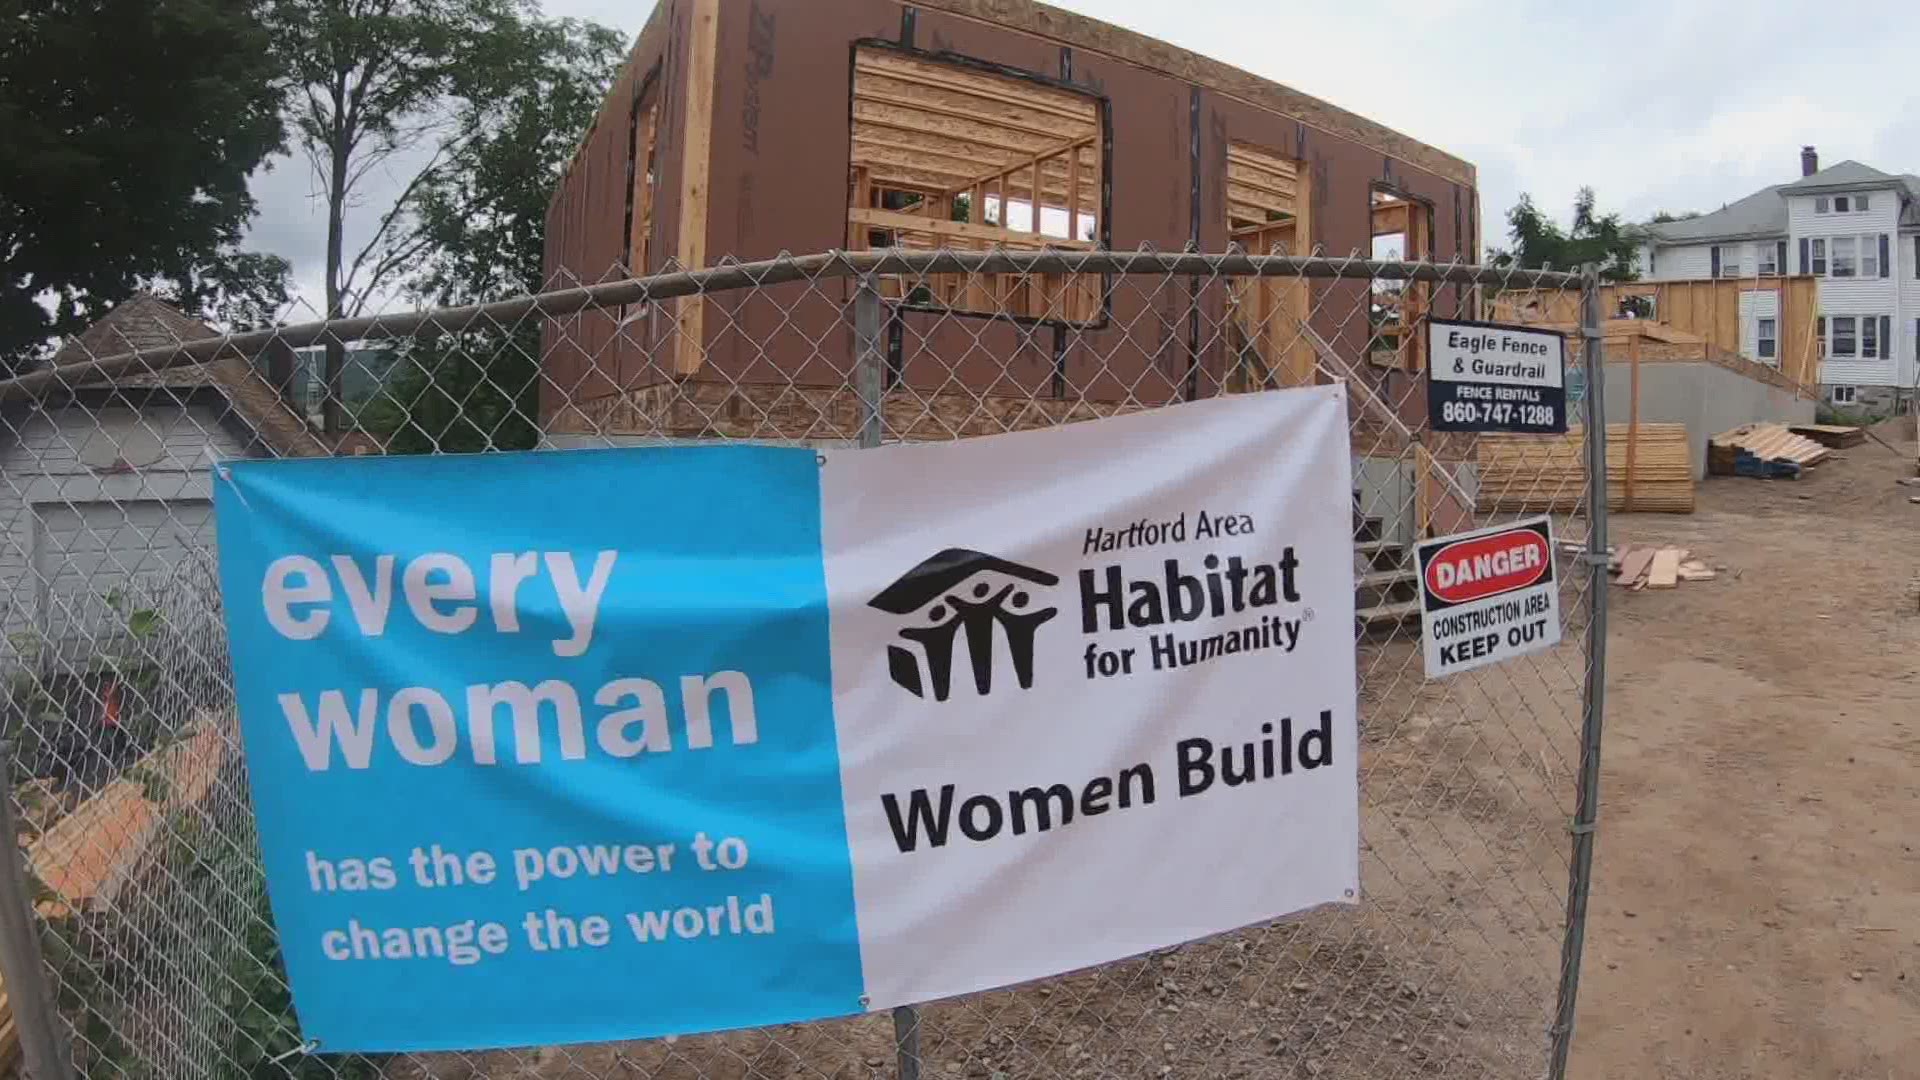 The Hartford Area Habitat for Humanity chapter has 19 all-women teams signed up for their Women Build Month.